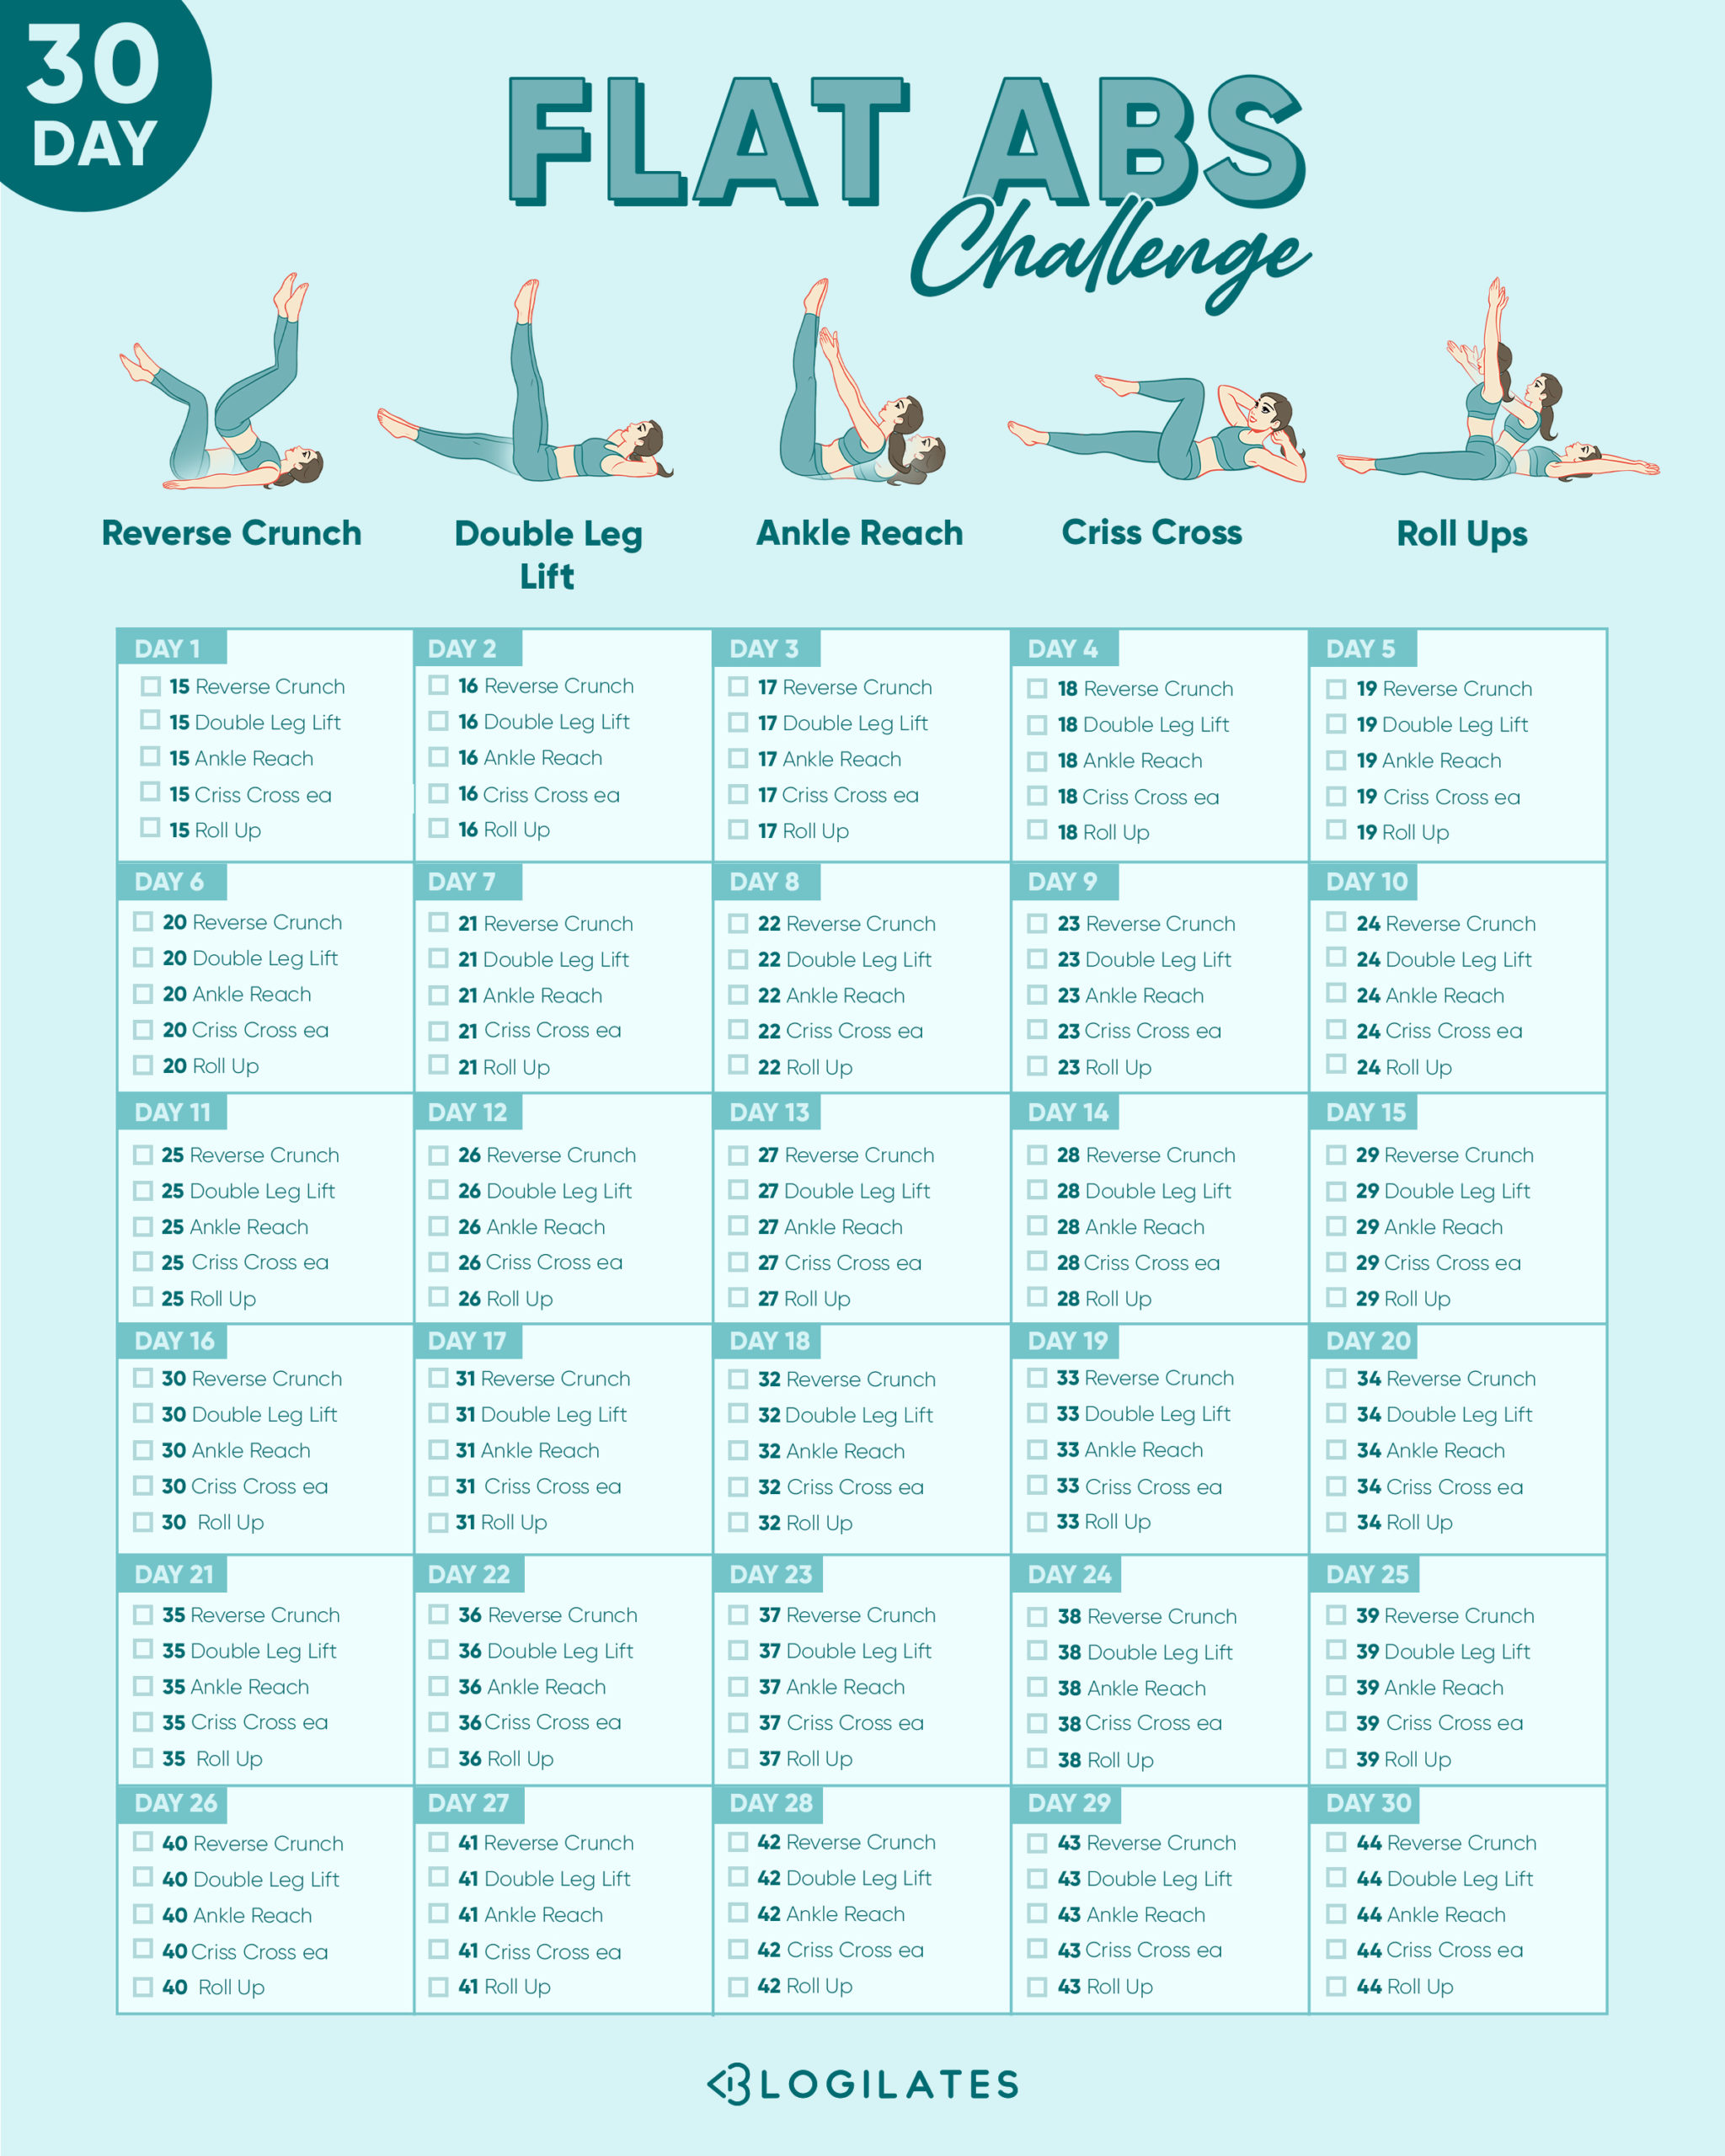 30 Day Flat Abs Challenge Blogilates